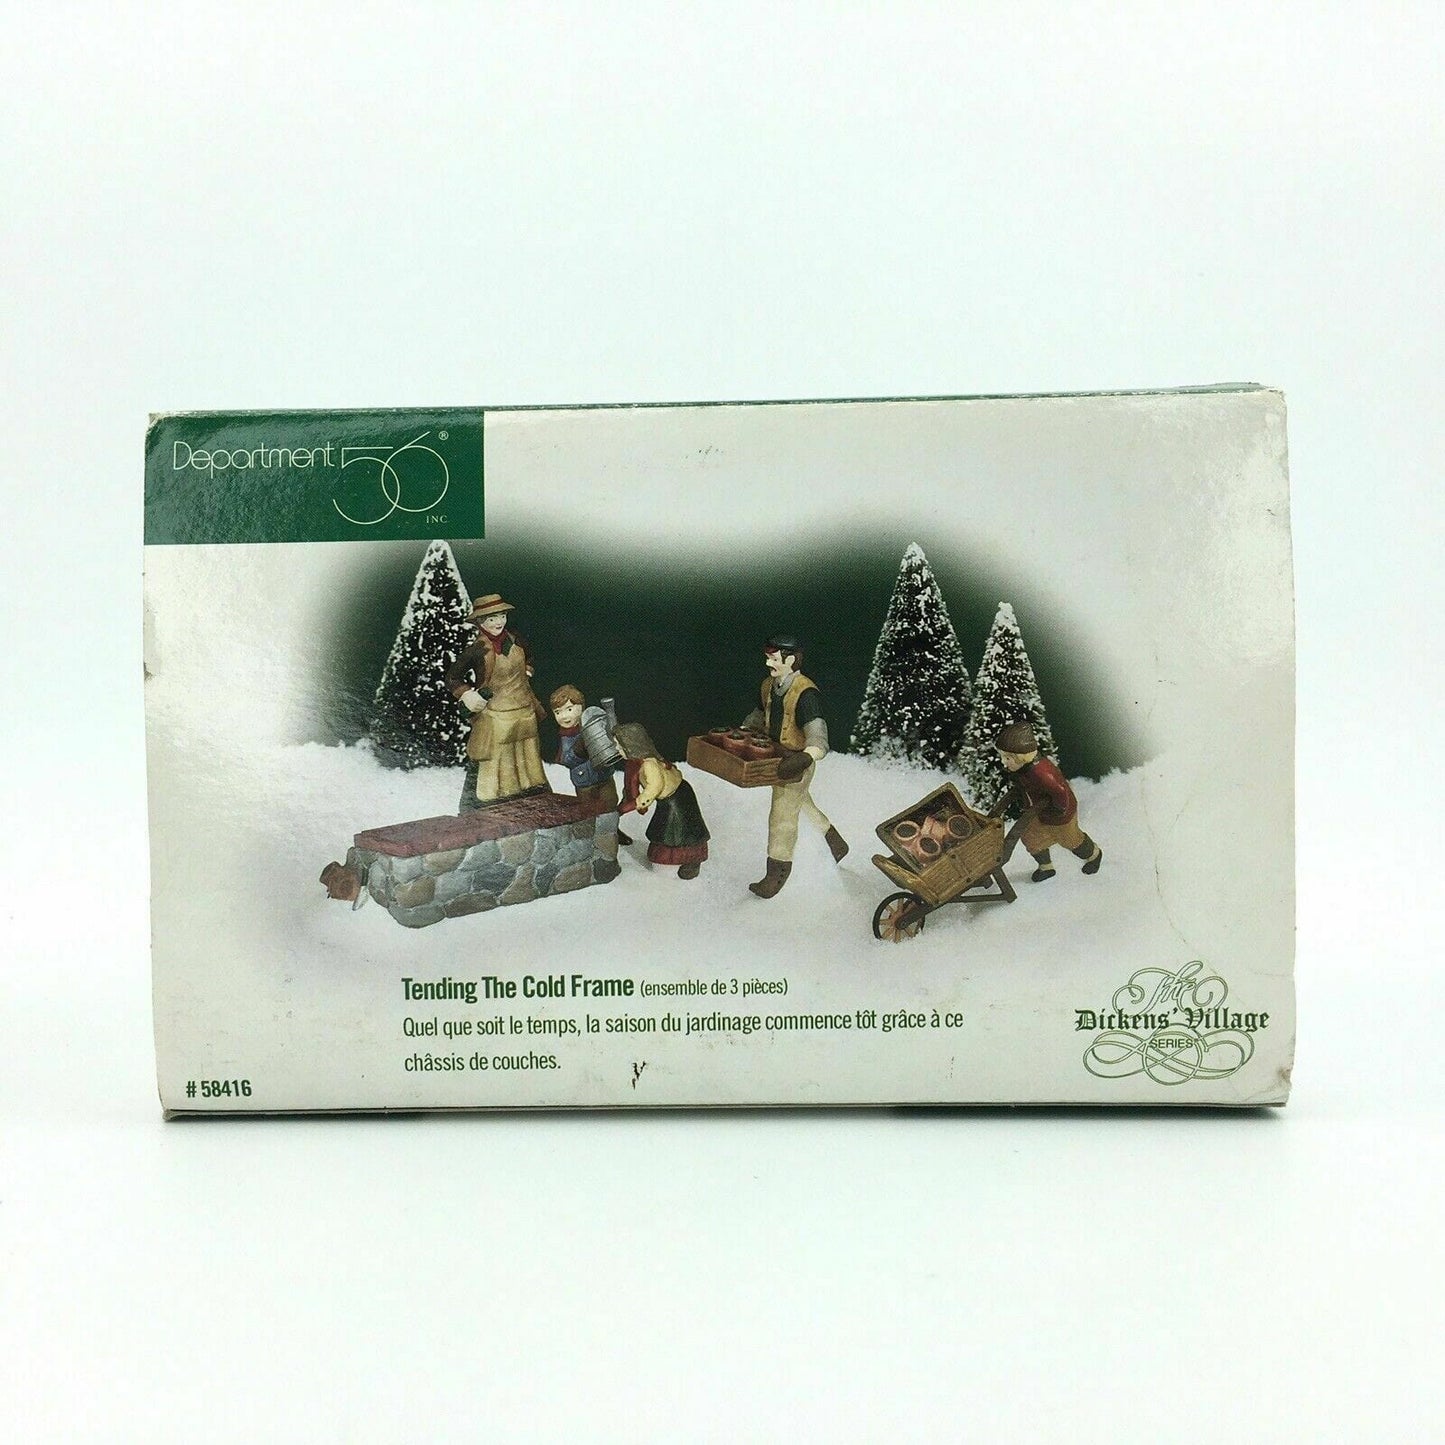 Dept 56 Dickens Village 1999 Tending The Cold Frame Table Accent #58416 RETIRED